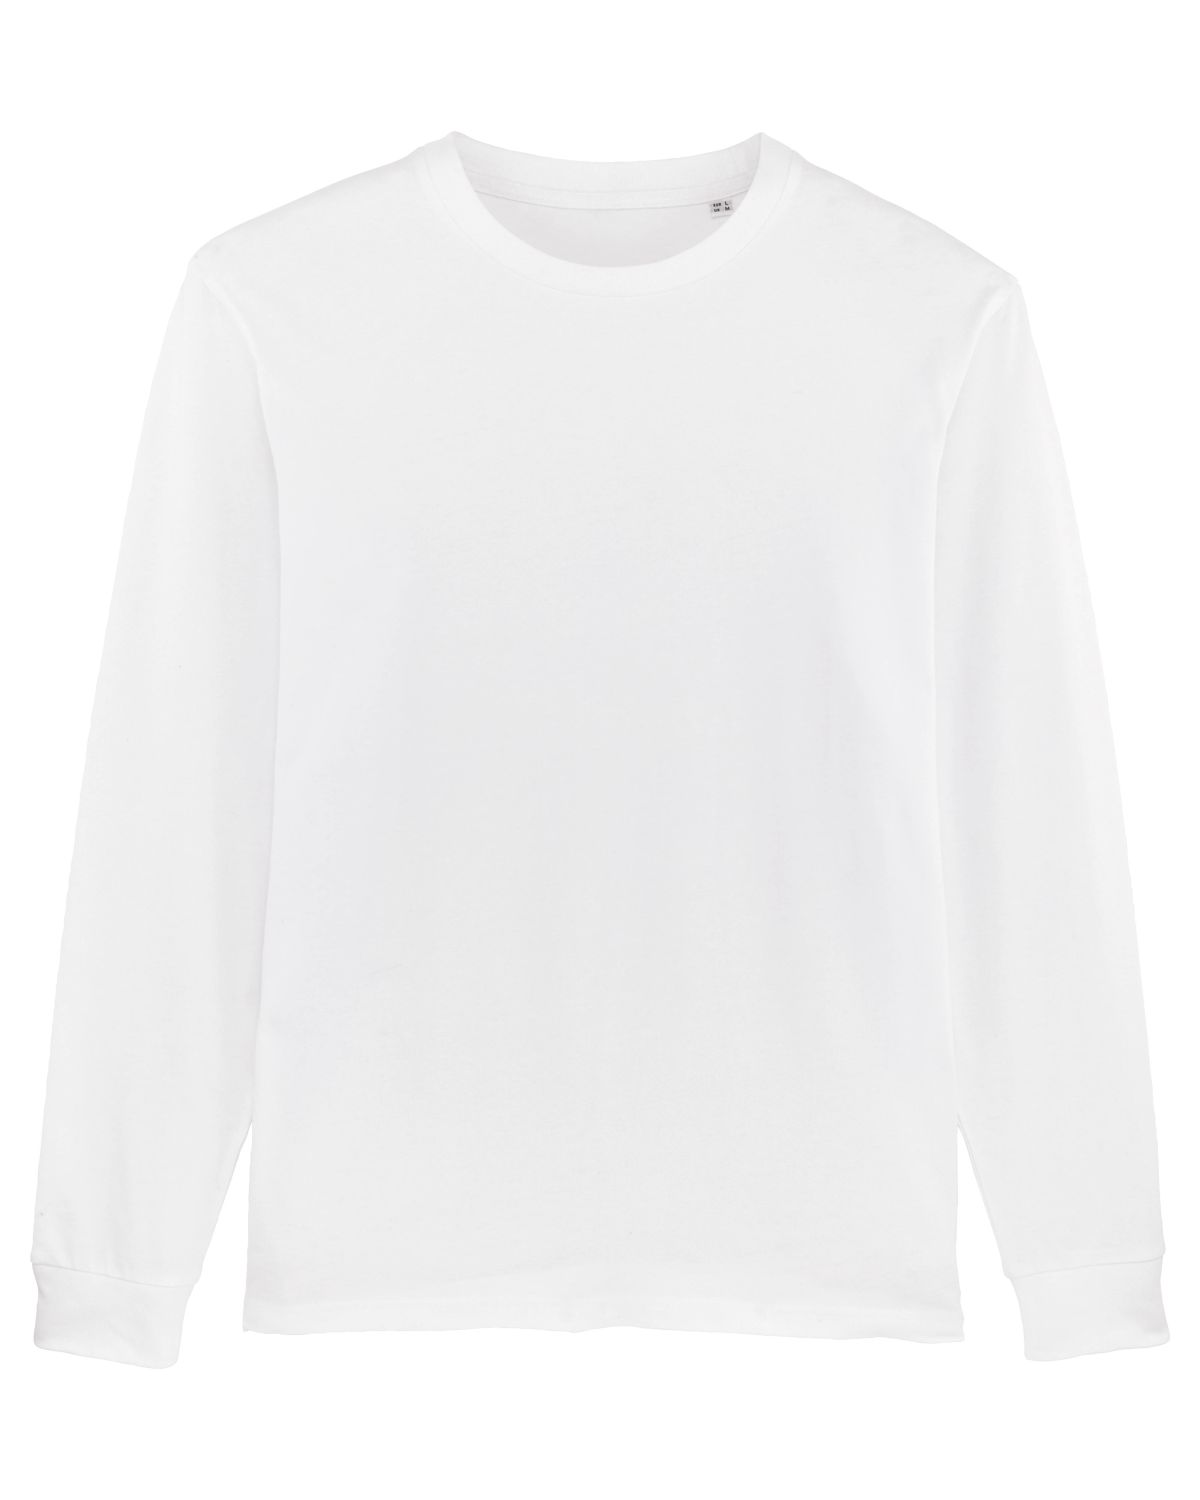 Customize your own long-sleeve t-shirt